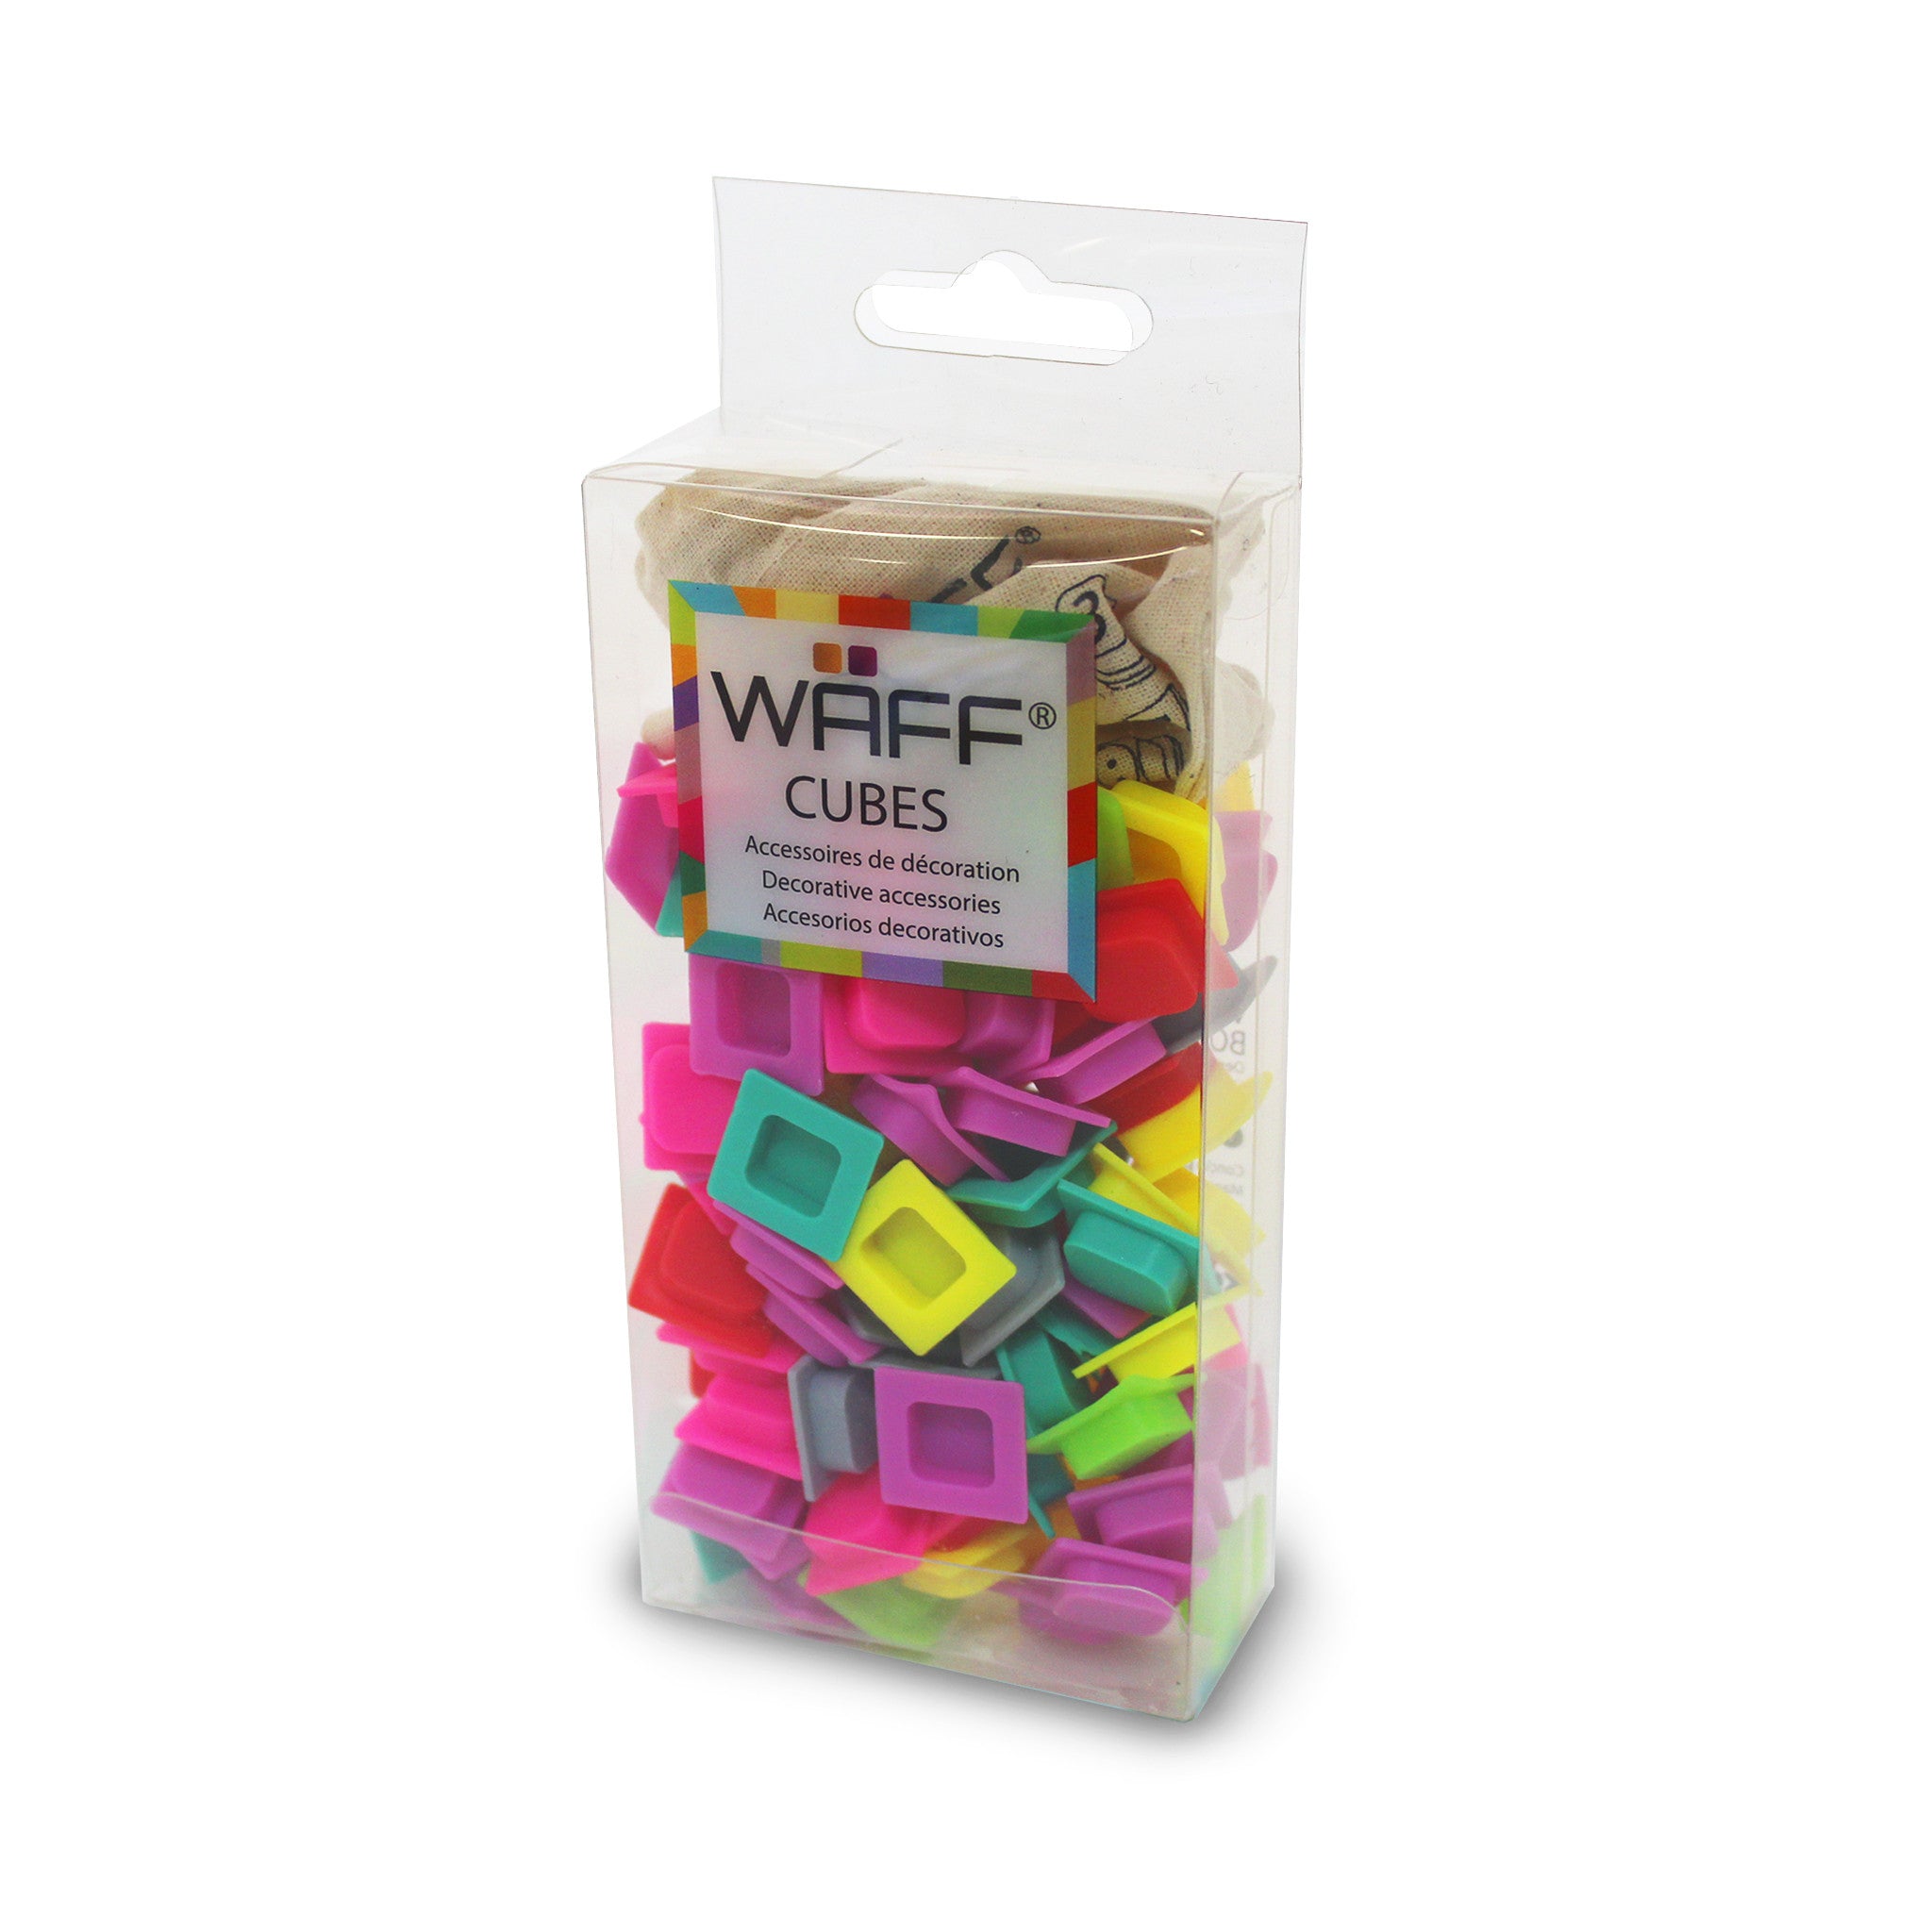 WAFF Cubes - Color - WAFF World Gifts Inc.